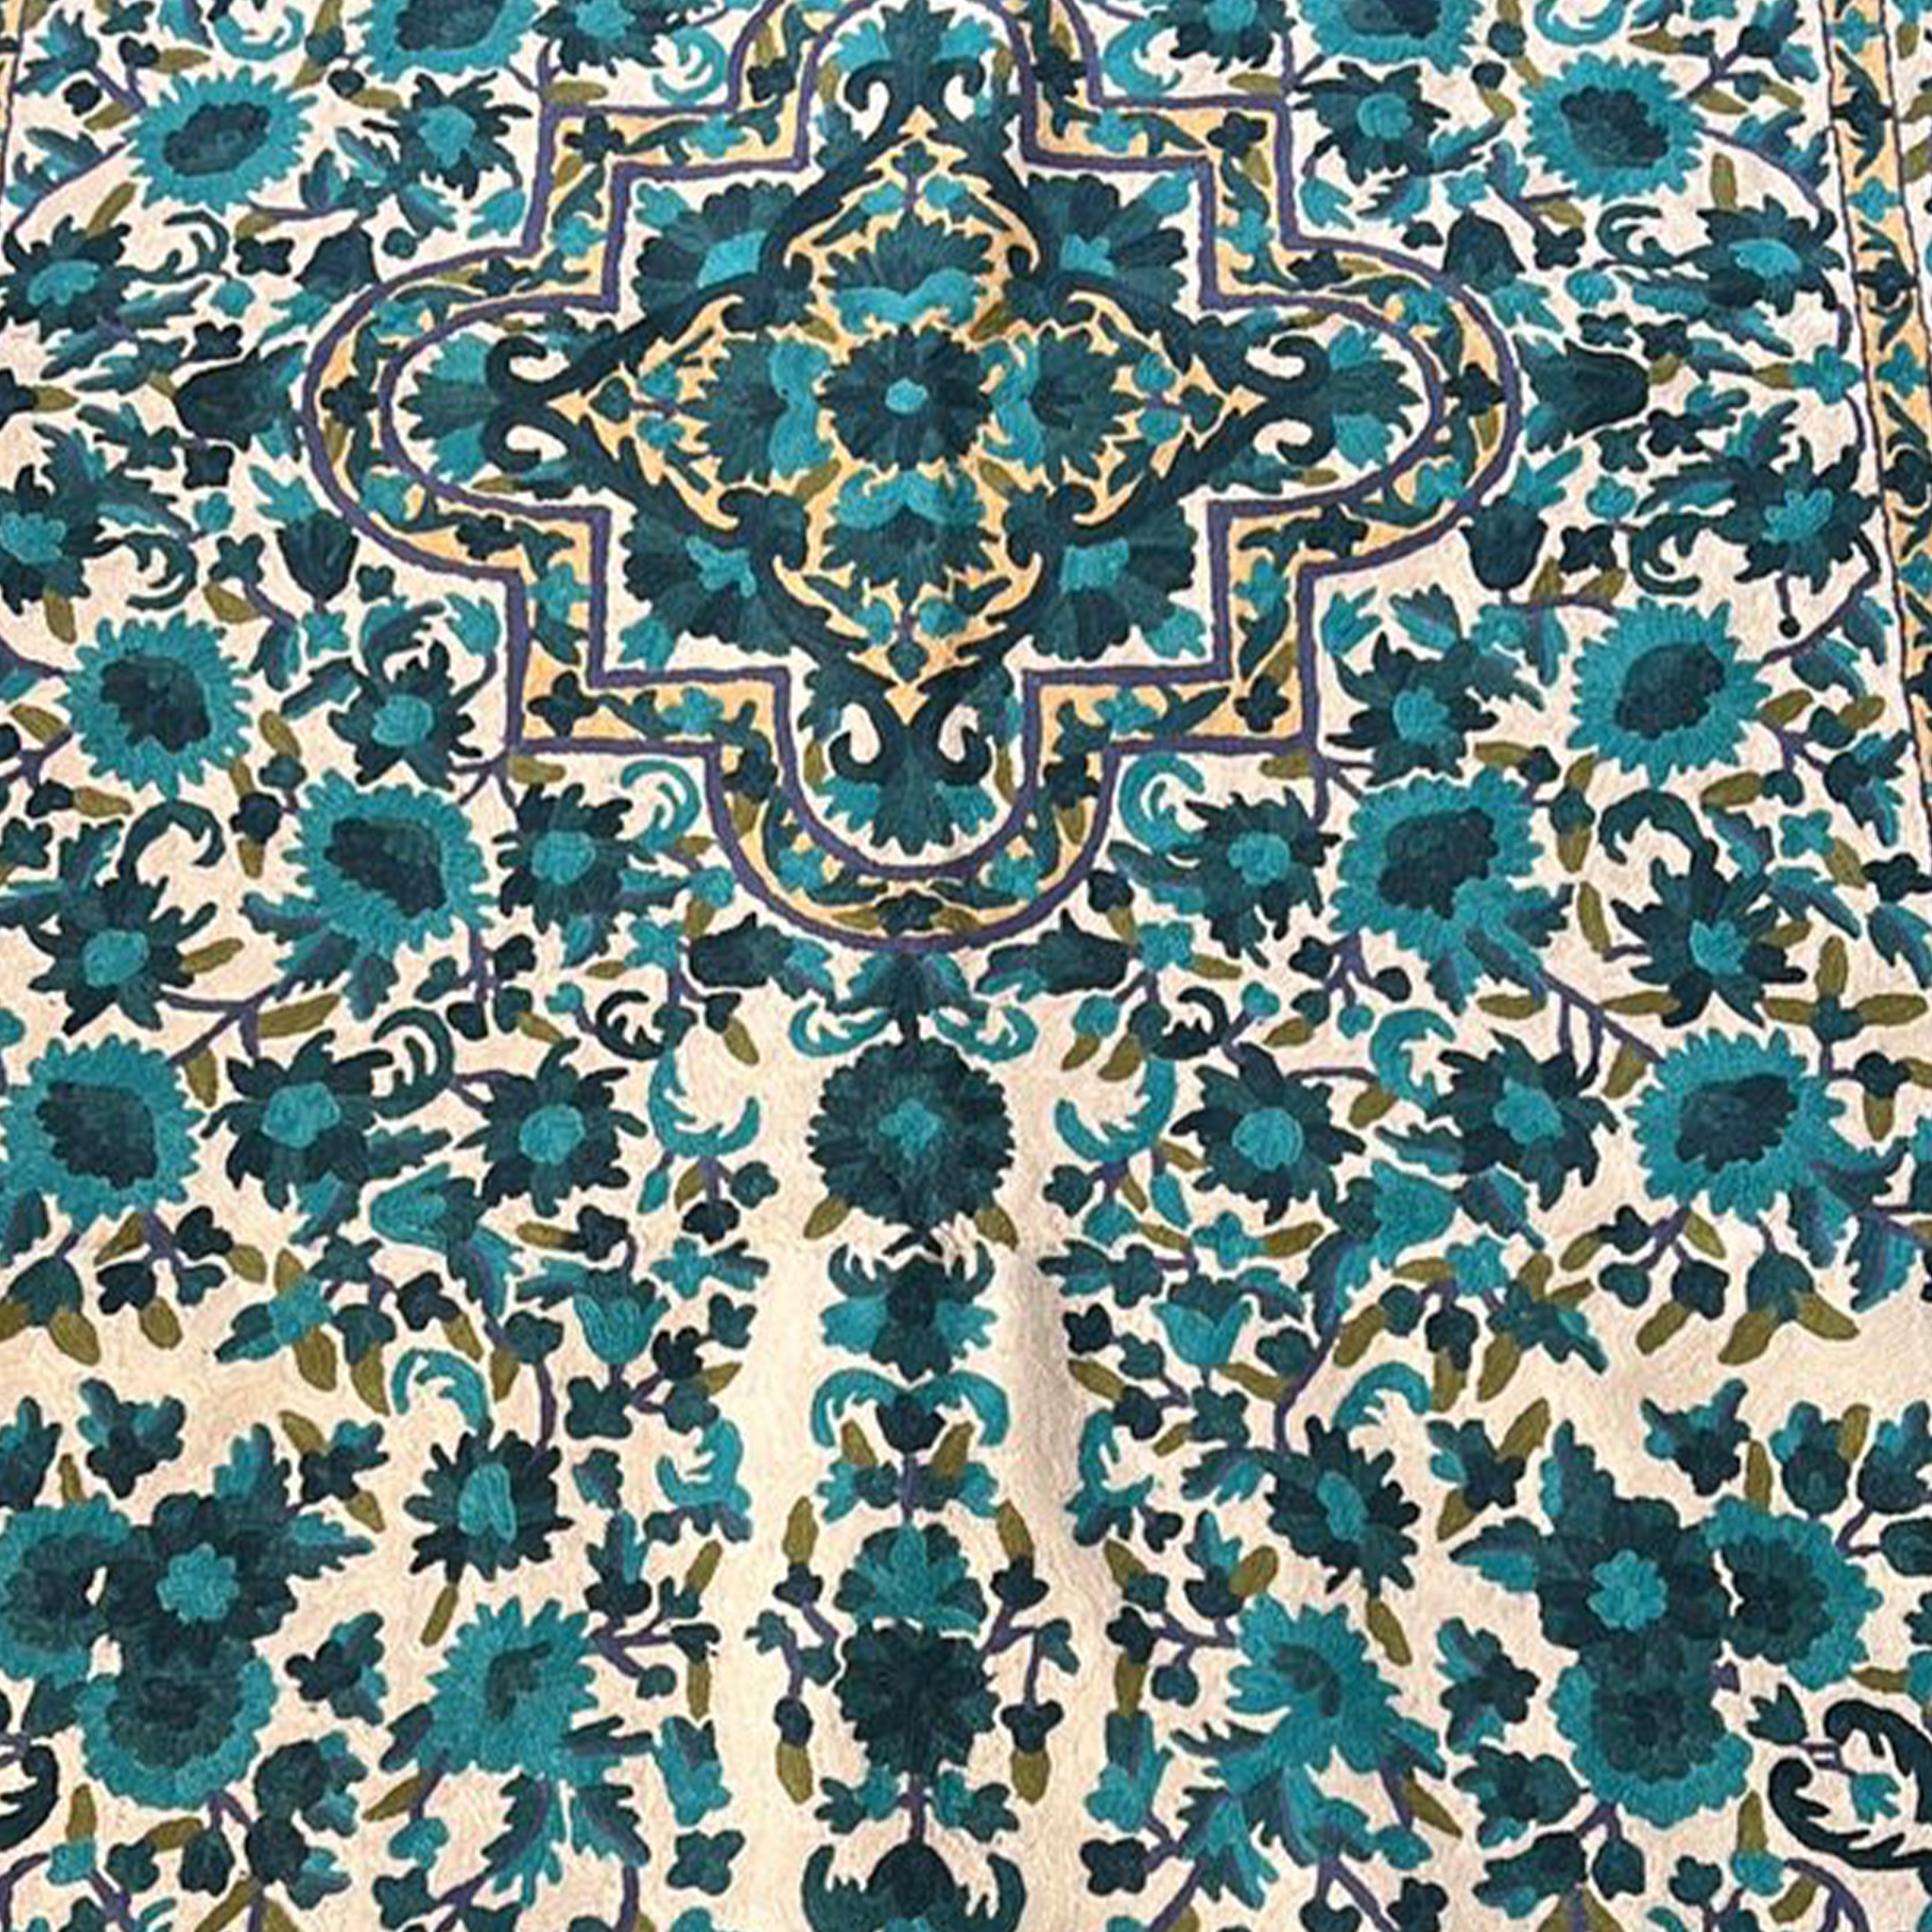 White Teal Crewel Wool Chainstitch Rug